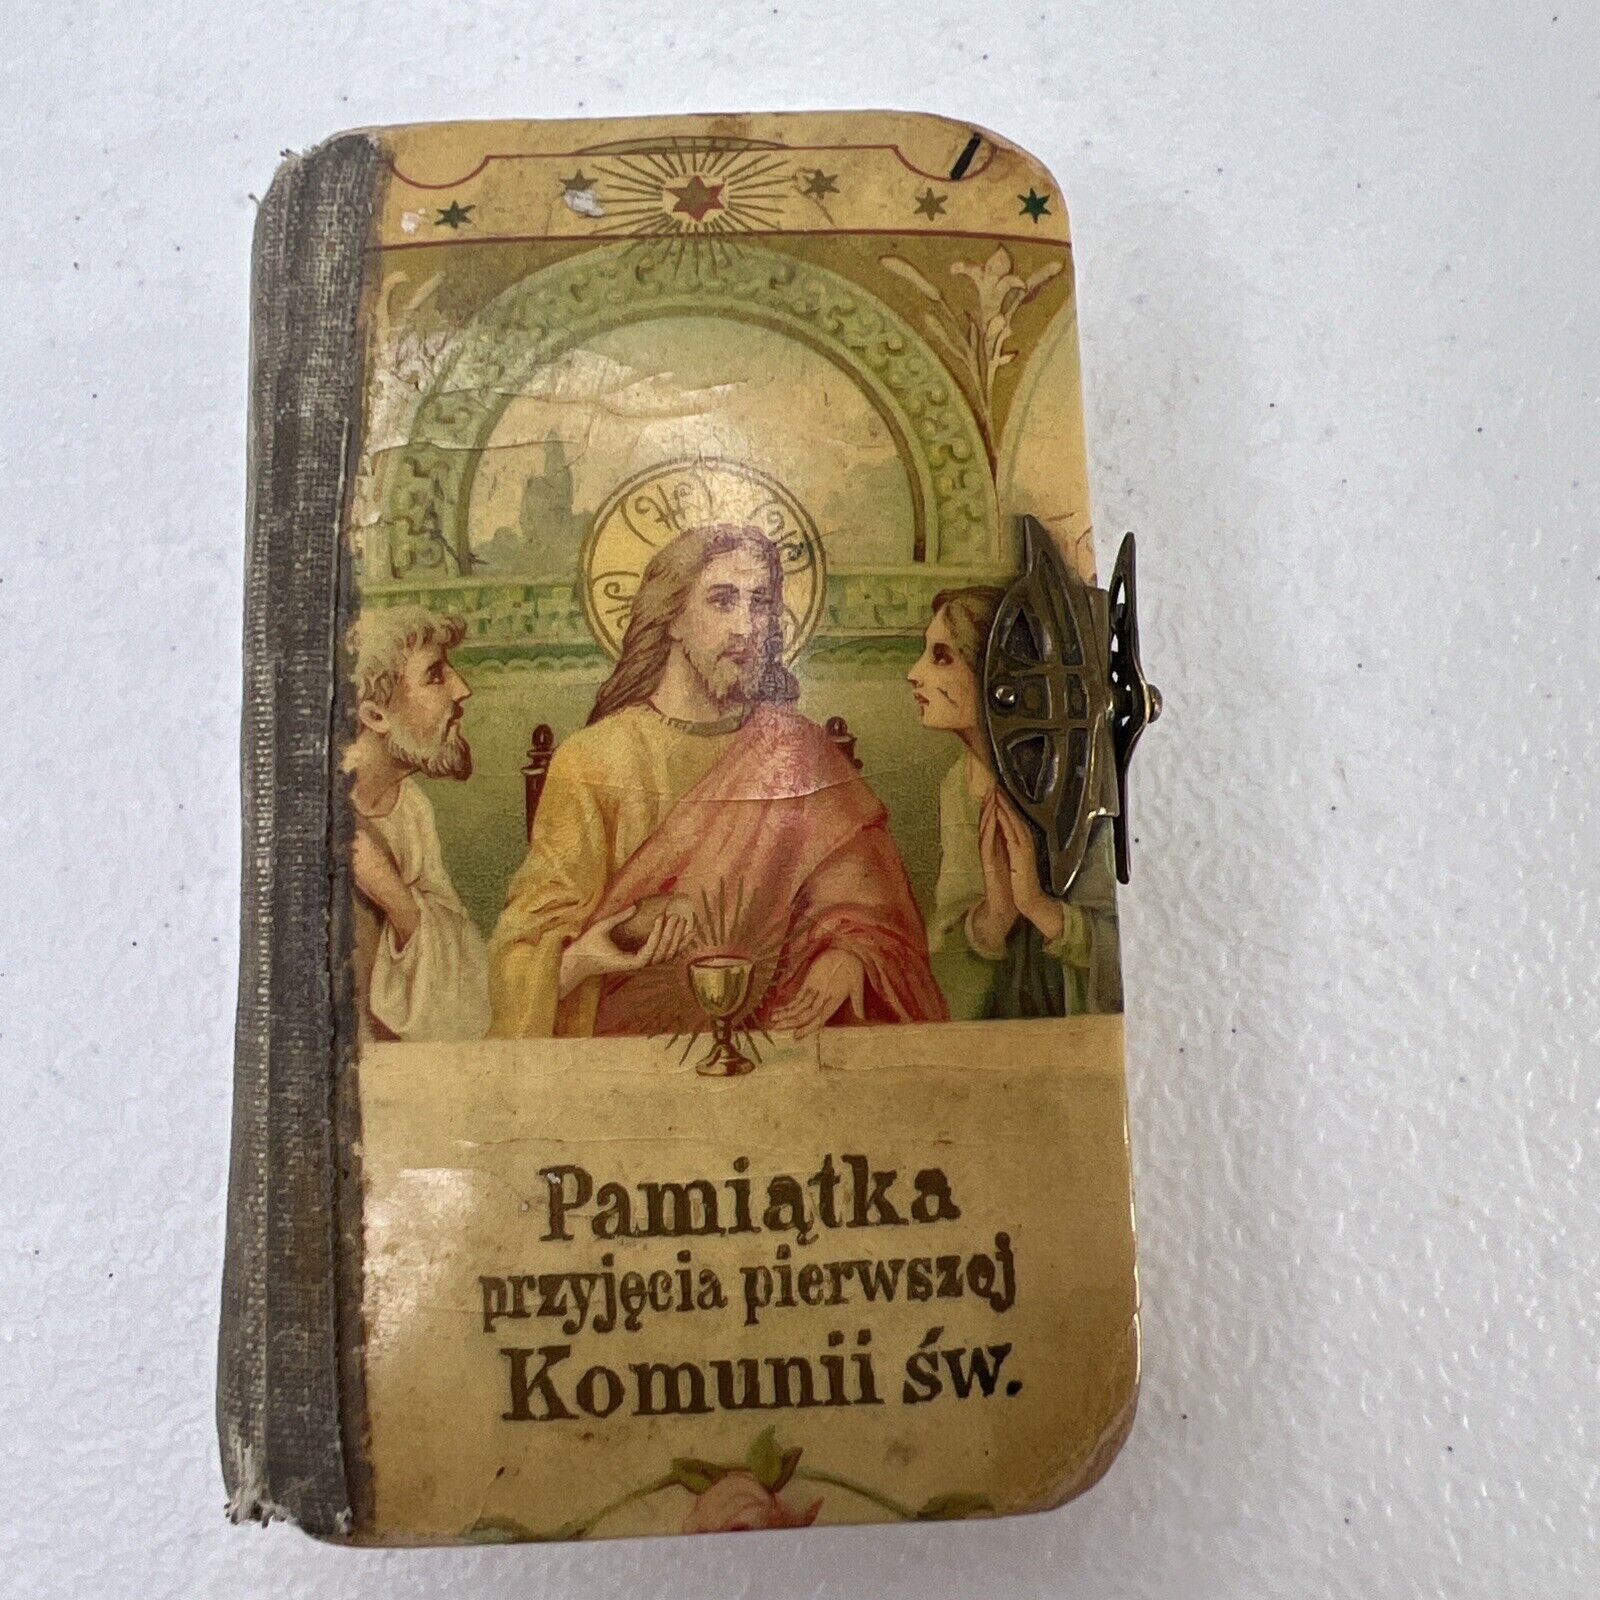 Antique 1924 Small Catholic Missalette Prayer Book w/Celluloid Cover - In Polish